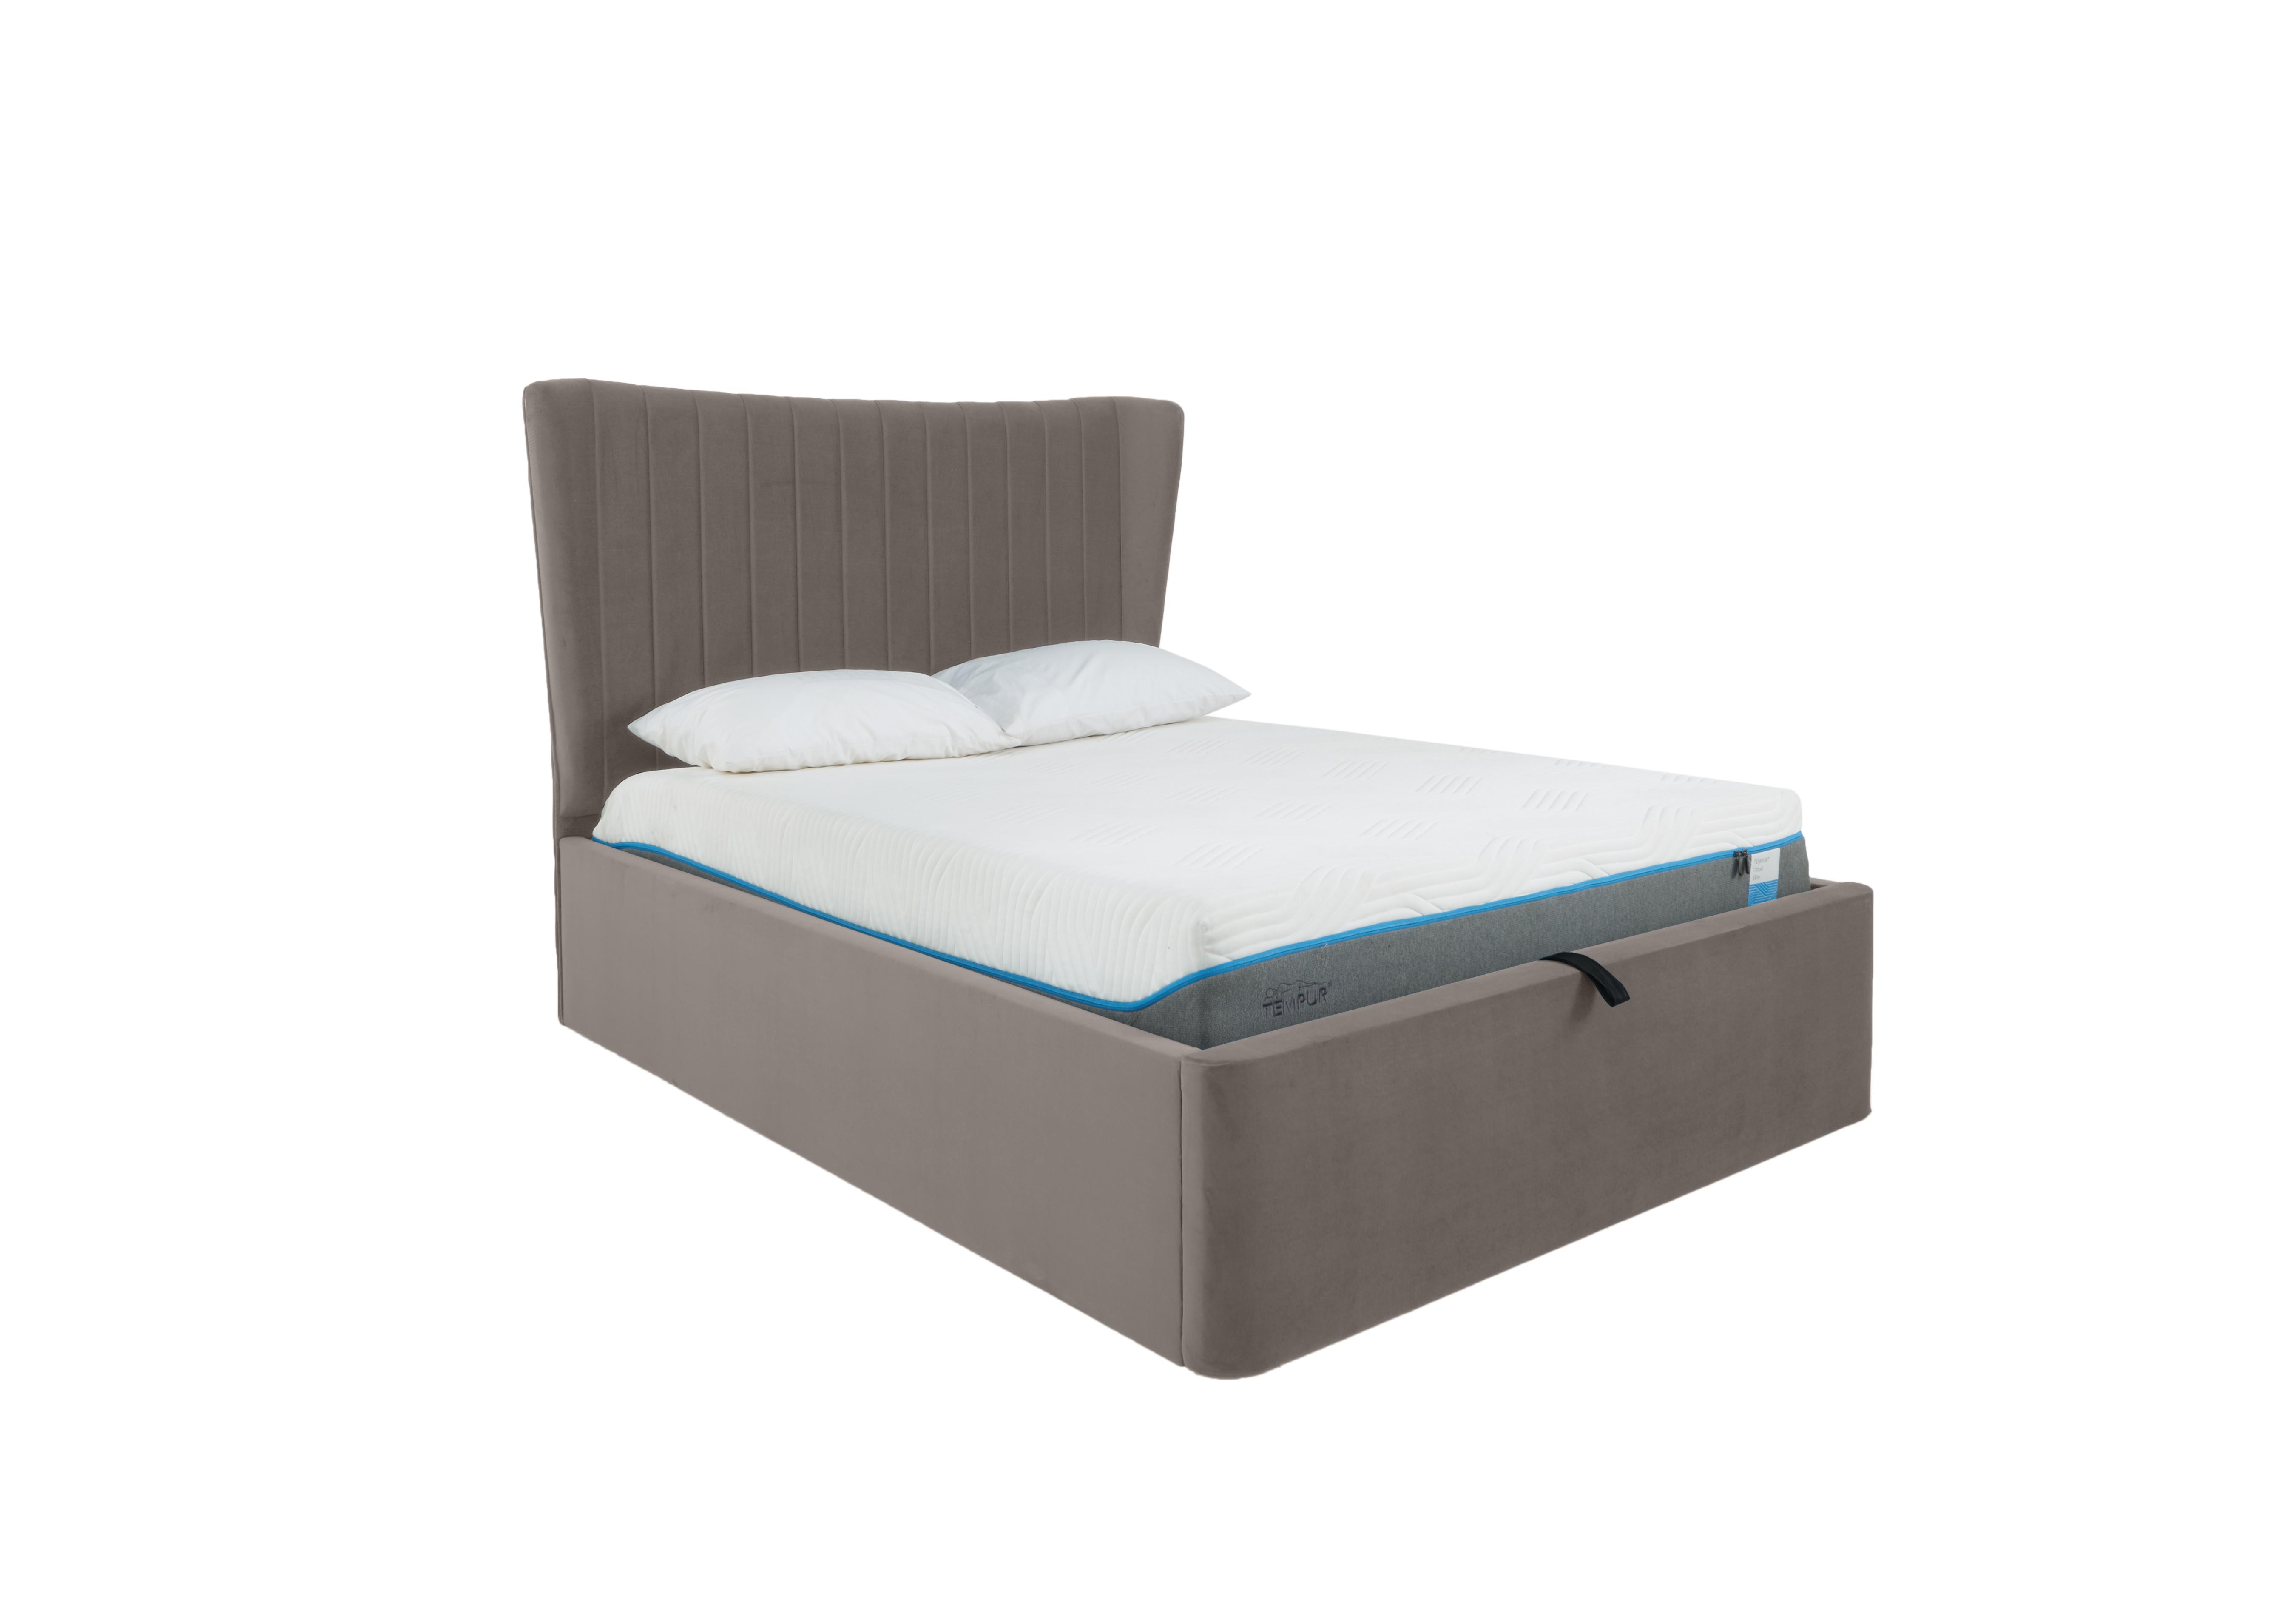 Roman Ottoman Bed Frame in Sanderson Potters Clay on Furniture Village